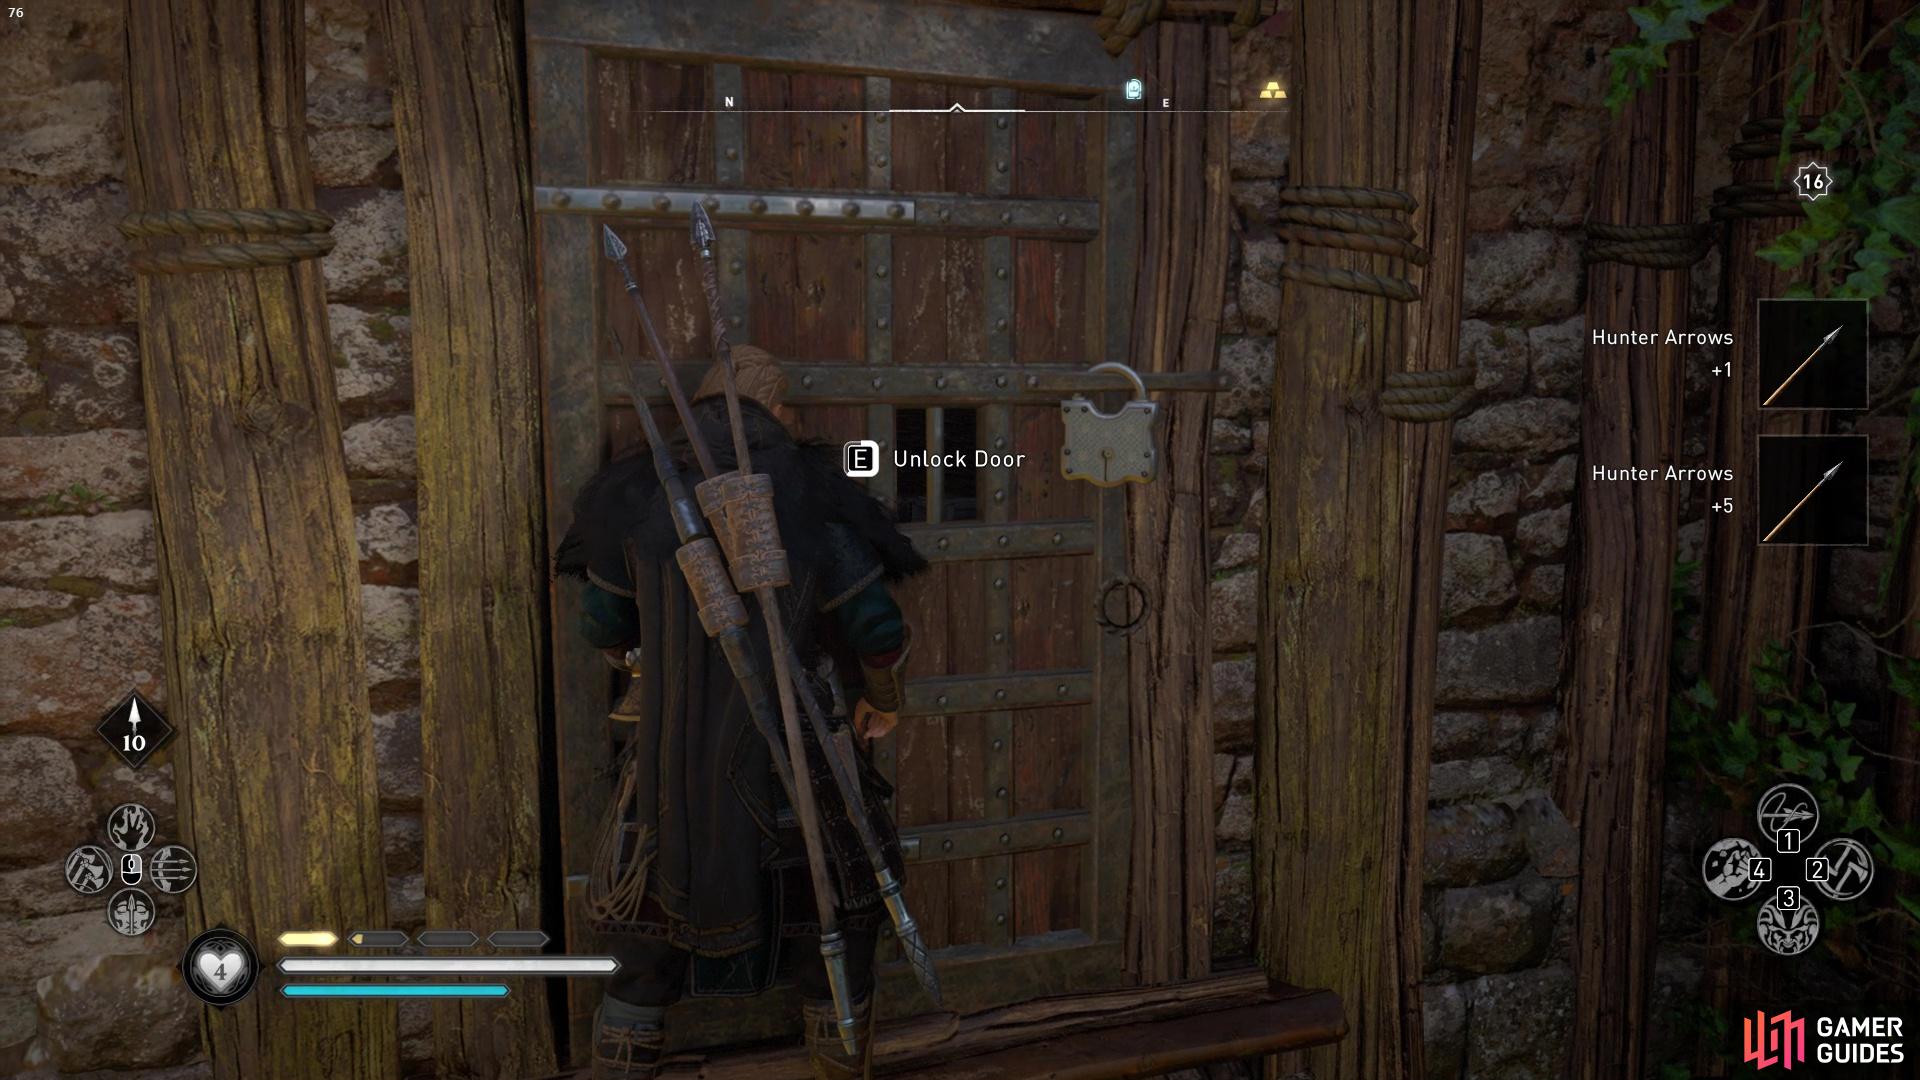 You can grab the key from the Hurler and use it to open up the locked building.